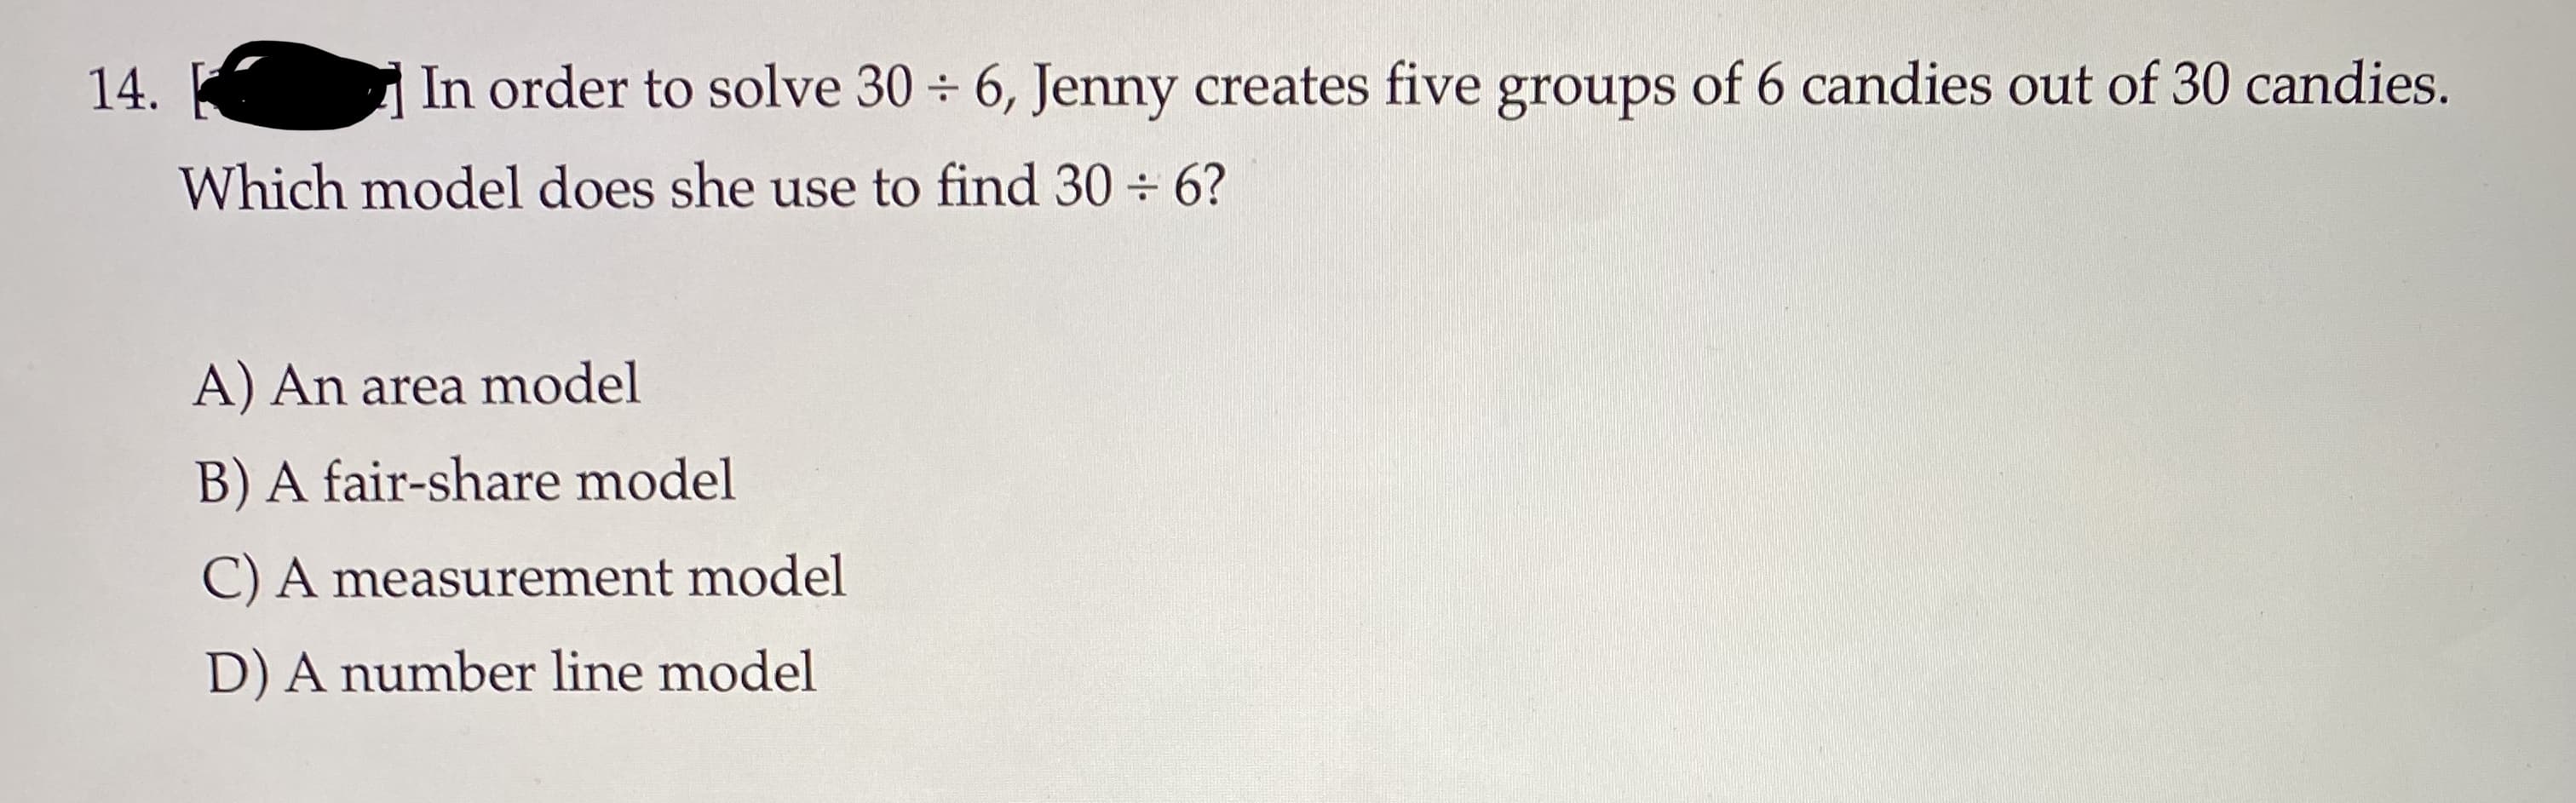 In order to solve 30 ÷ 6, Jenny creates five groups of 6 candies out of 30 candies.
Which model does she use to find 30 ÷ 6?
14.
A) An area model
B) A fair-share model
C) A measurement model
D) A number line model
